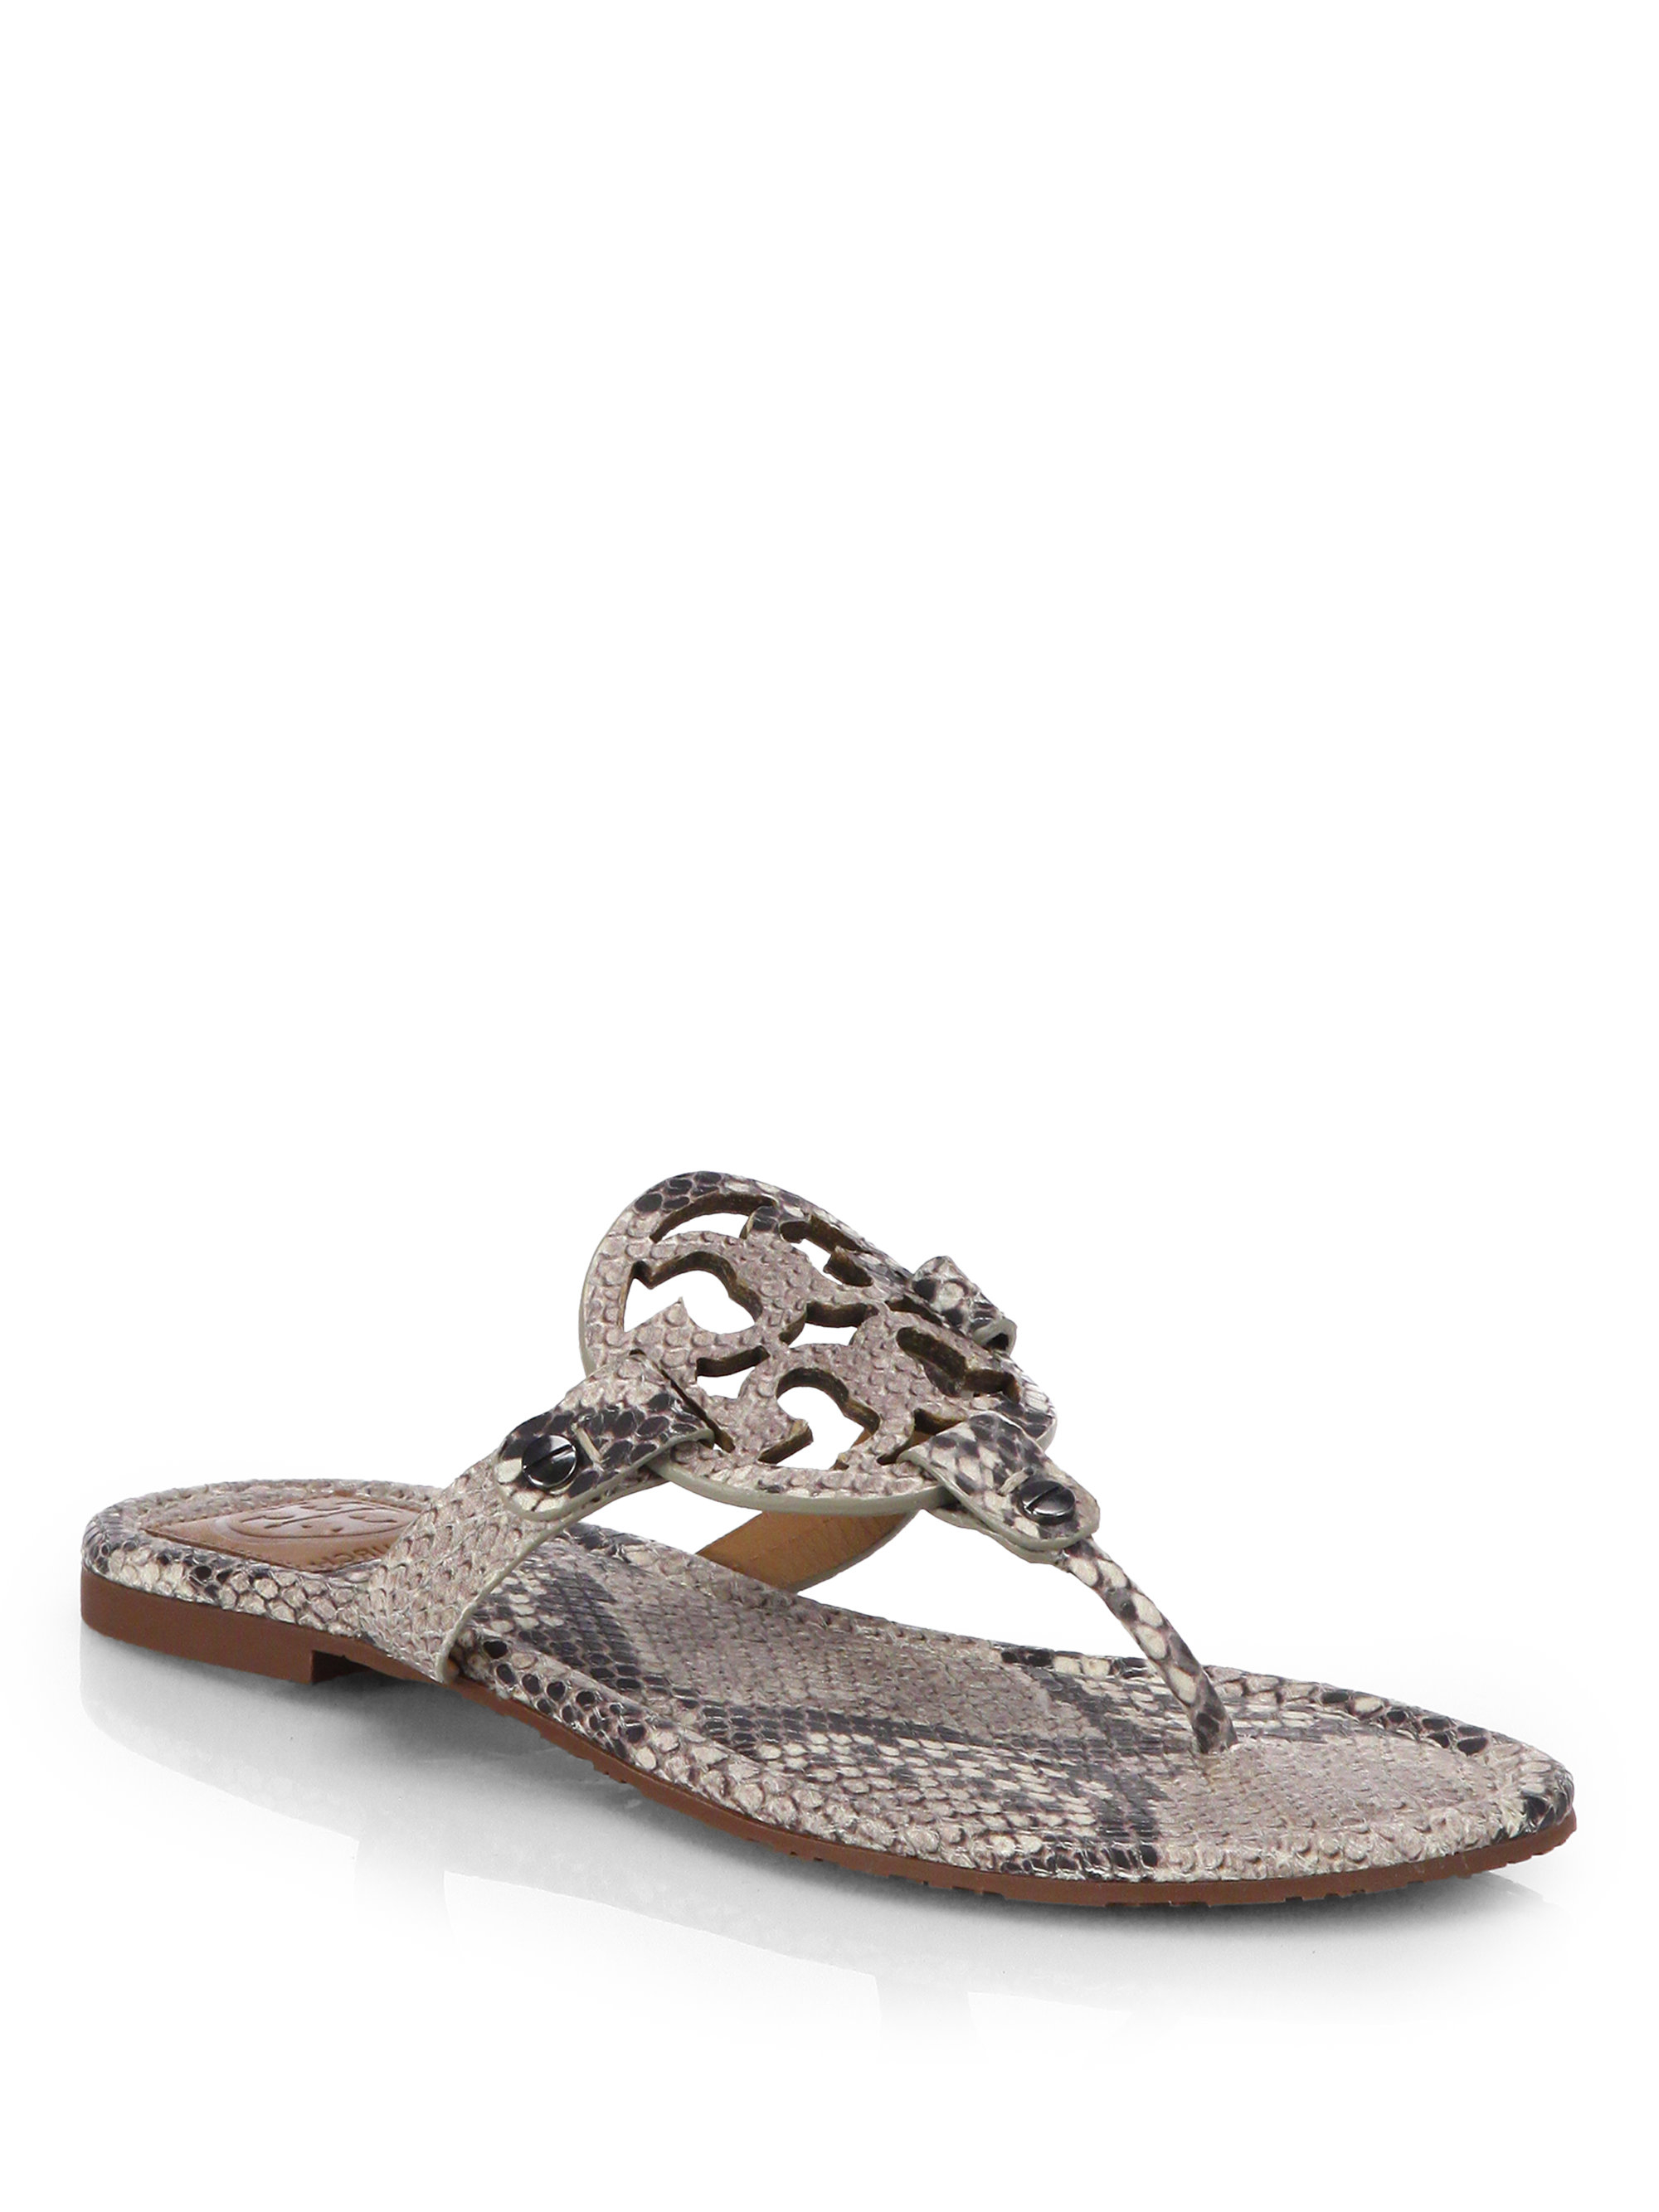 Tory Burch Miller Snake-Effect Leather Sandals in Animal (NATURAL ...